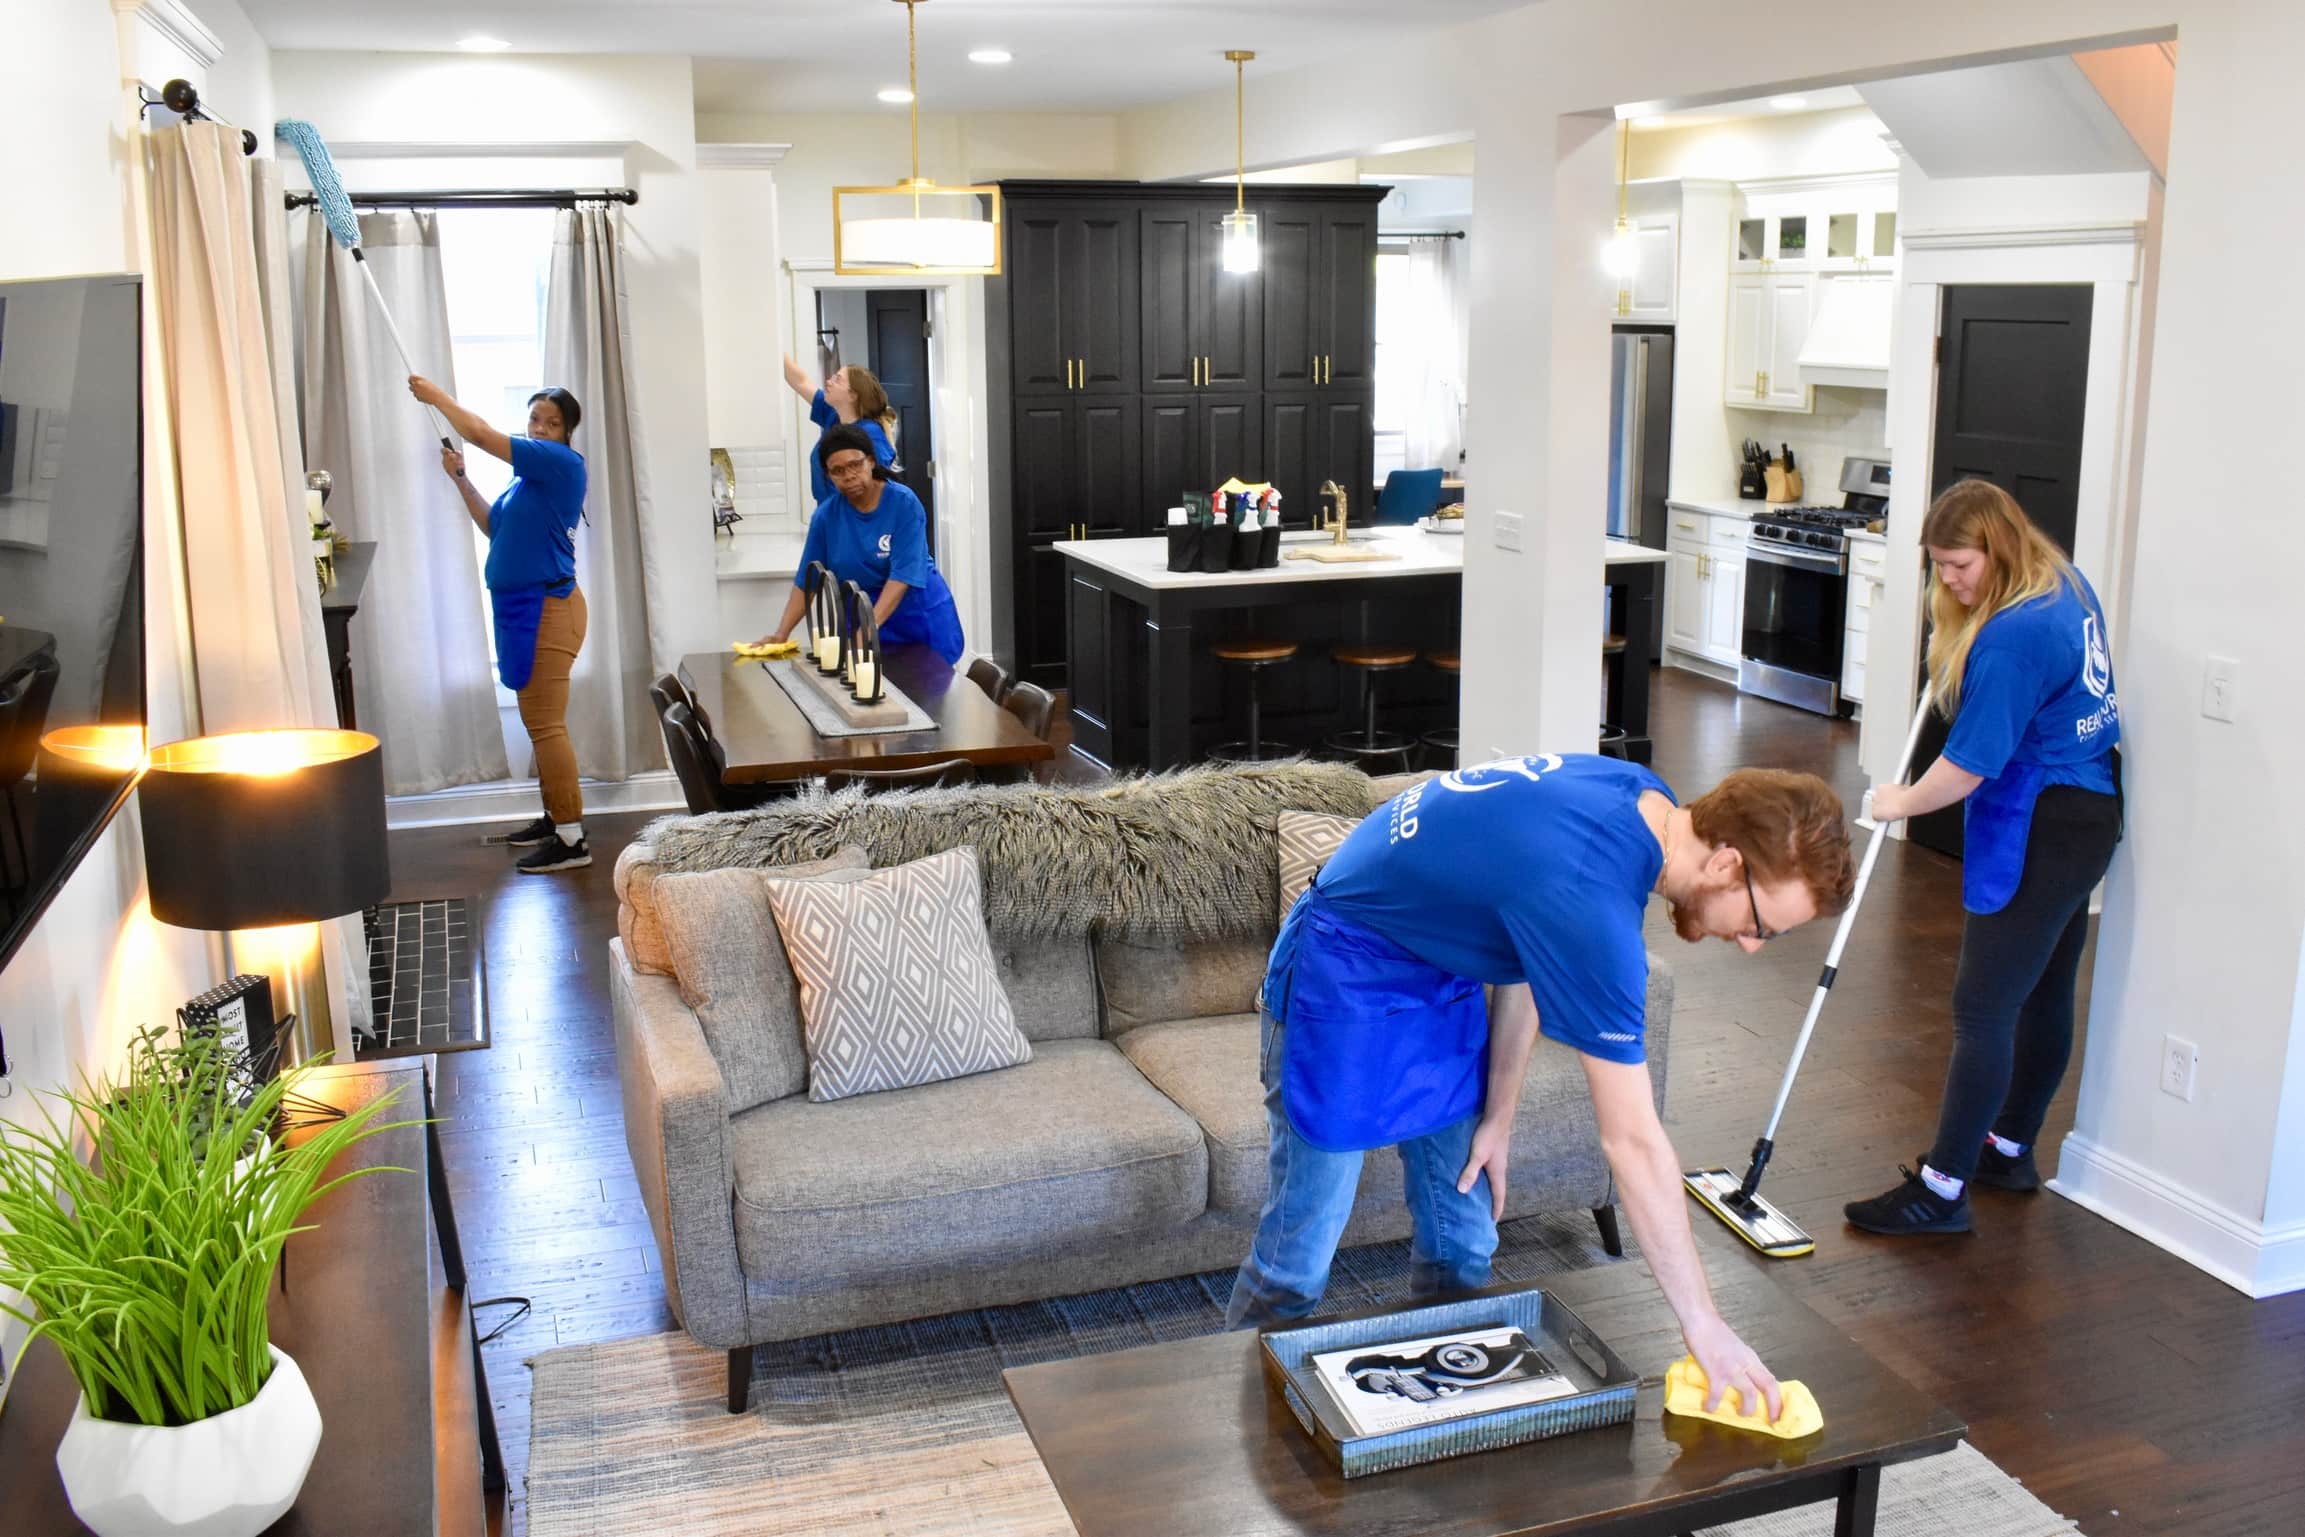 Real World Cleaning Services - Worthington (OH 43085), US, maid services columbus